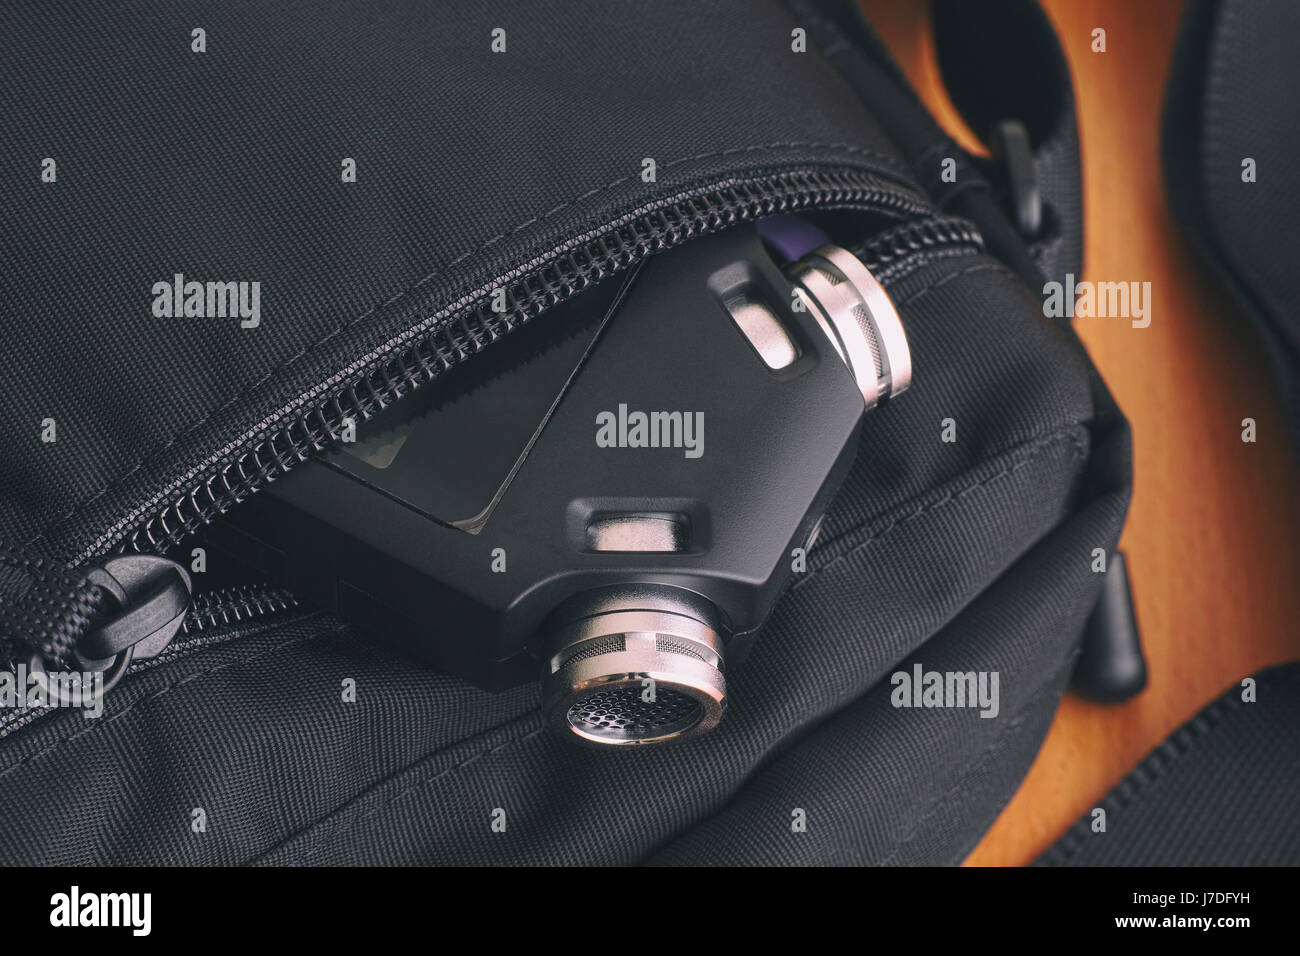 Voice recorder in a bag. Close up. Stock Photo